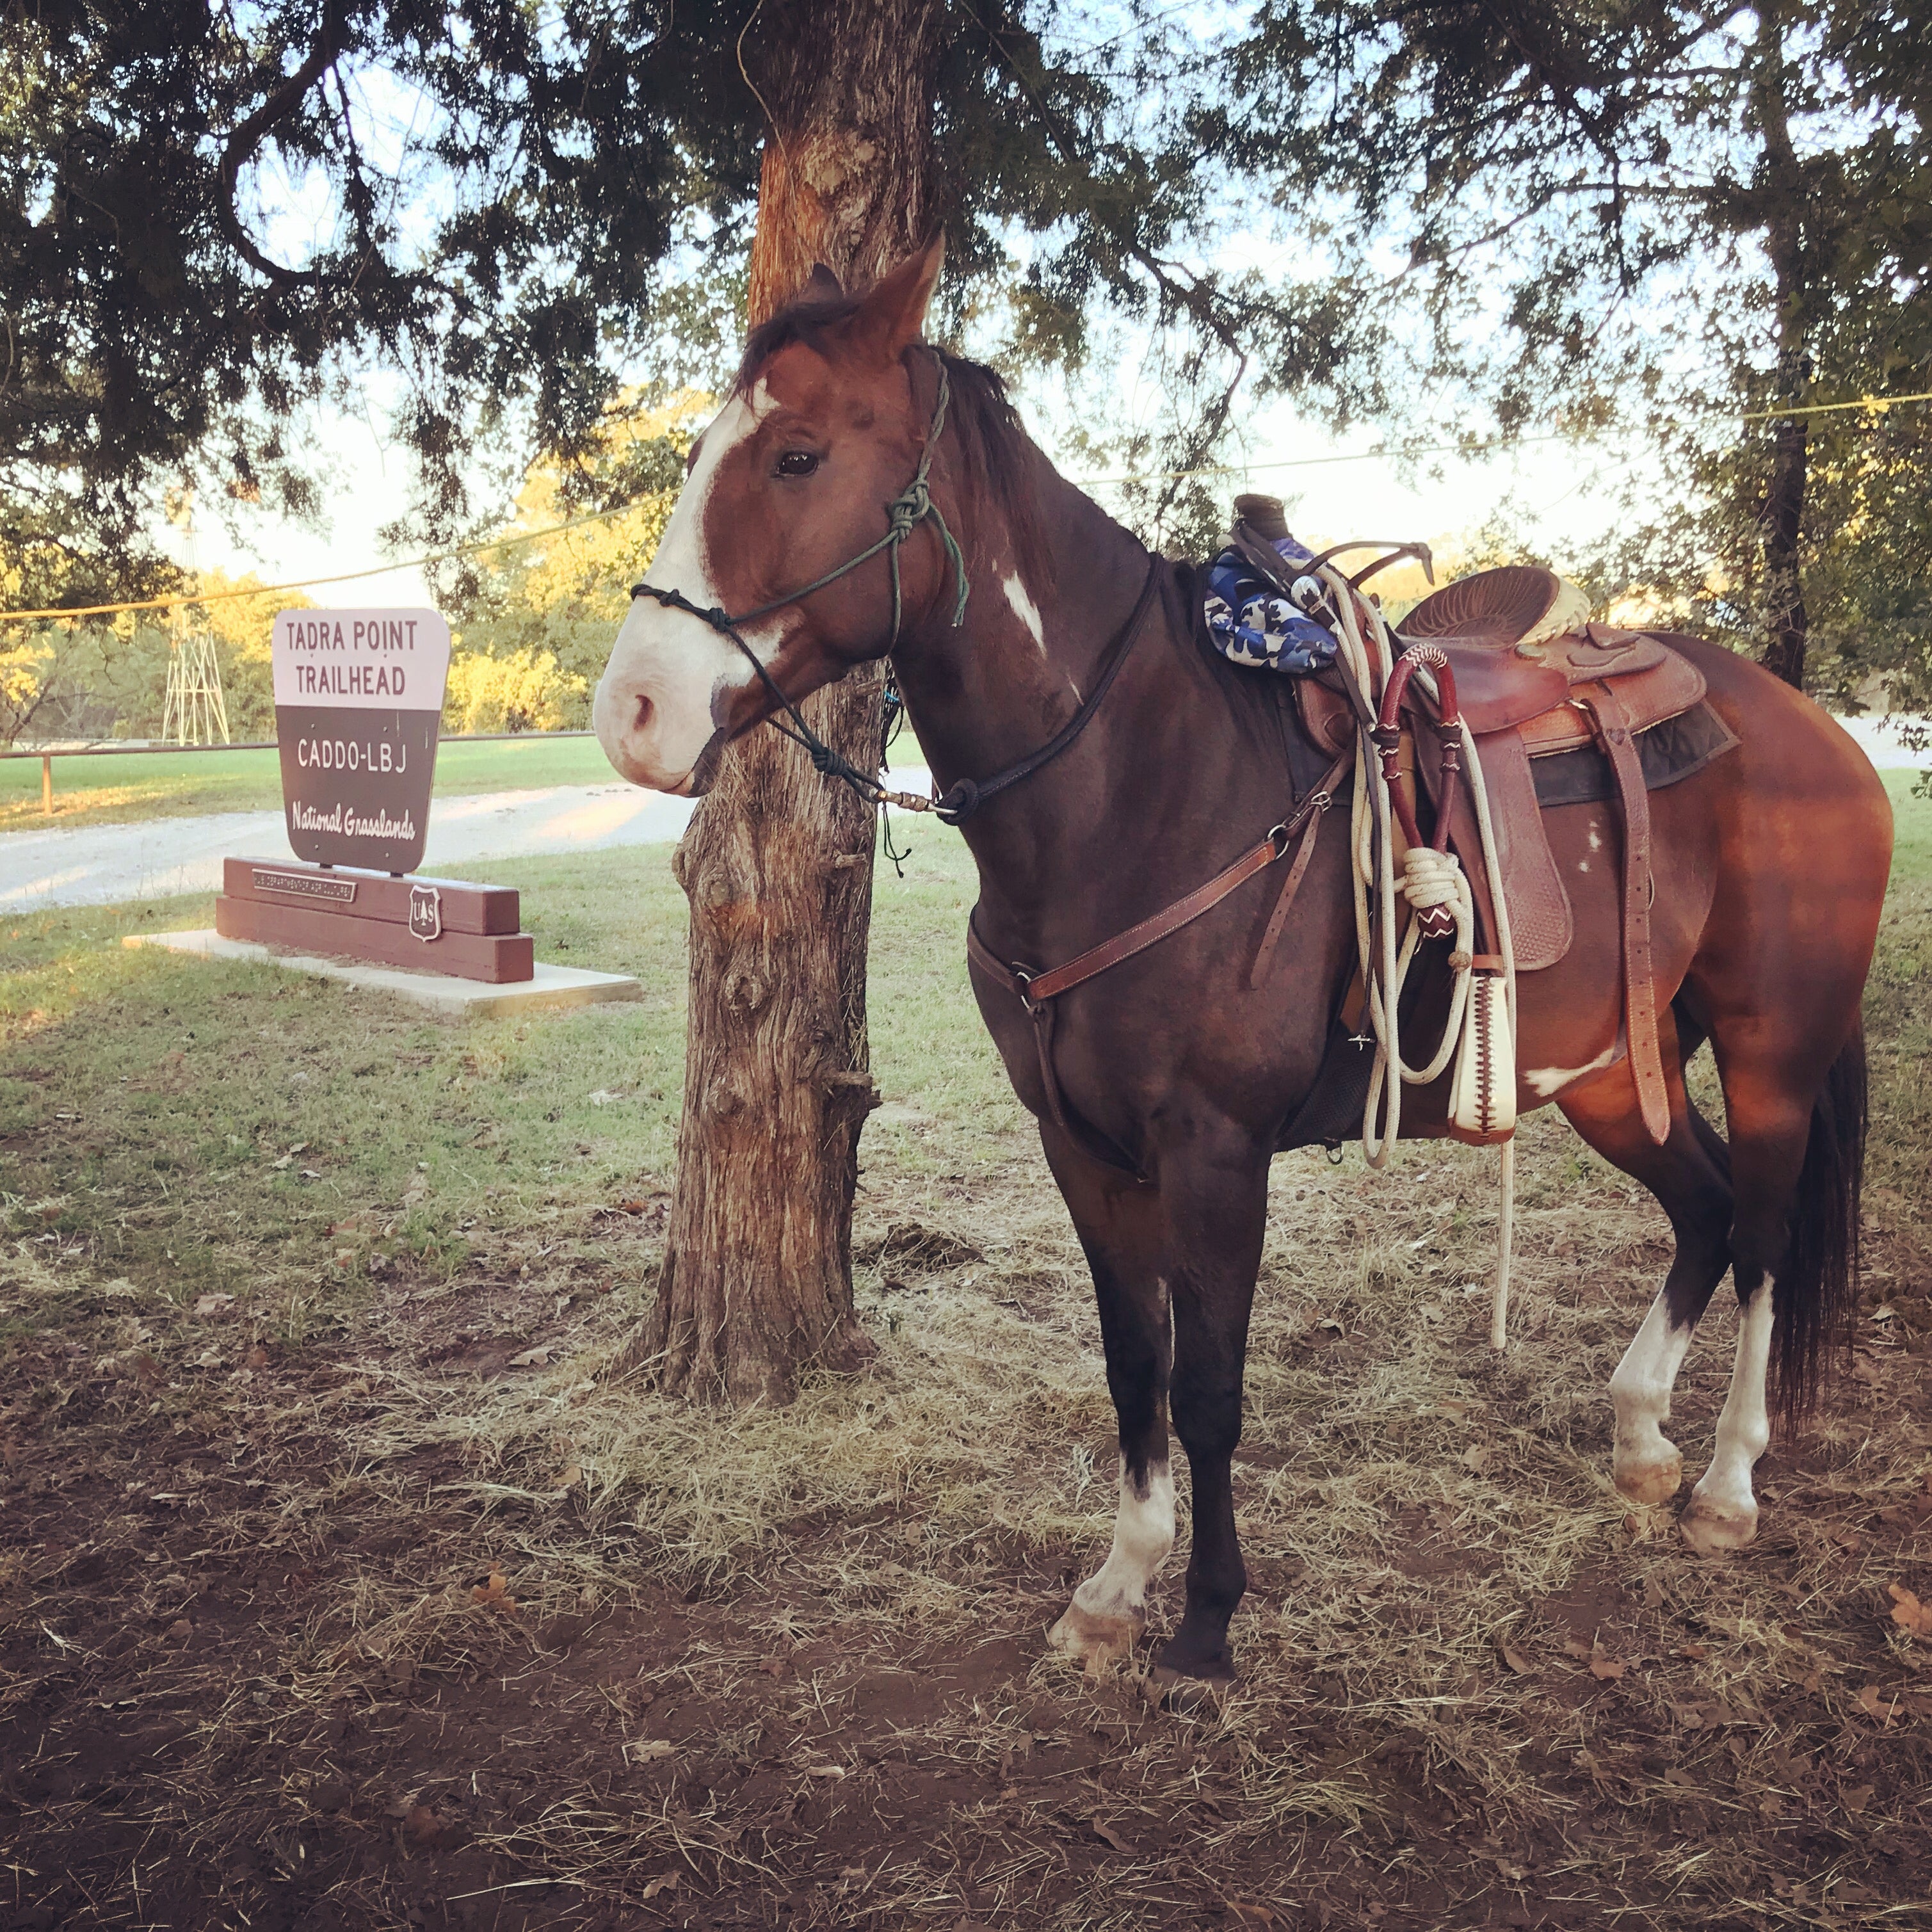 Horse saddled up in western tack and tied to a tree outside the state park.